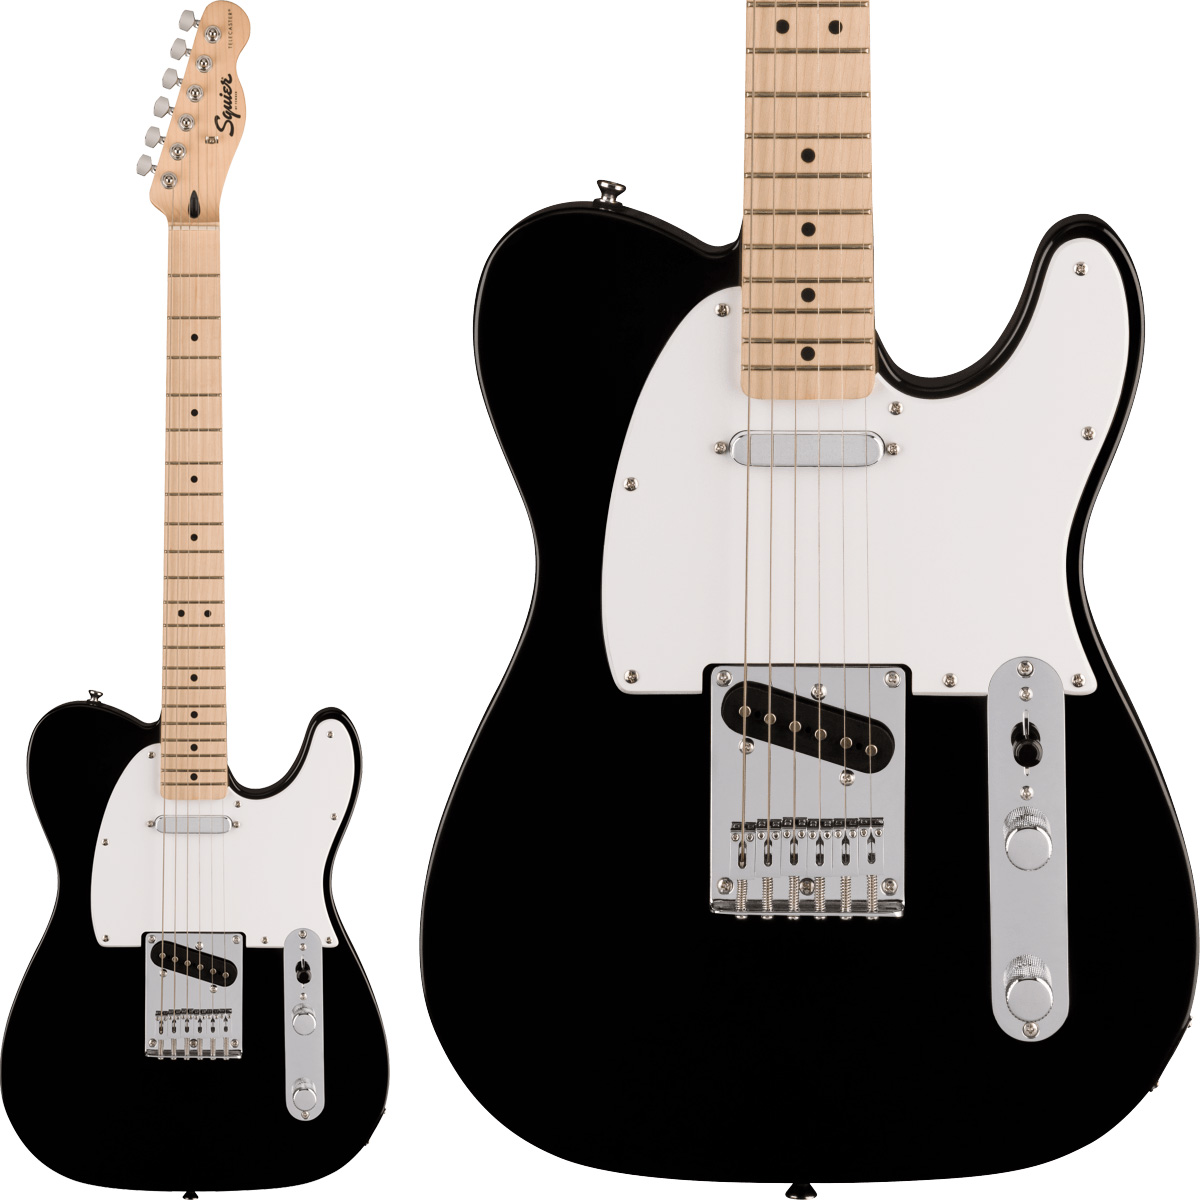 Squier by Fender SONIC TELECASTER Maple Fingerboard White Pickguard Black  スクワイヤー スクワイア 【 札幌ステラプレイス店 】 島村楽器オンラインストア